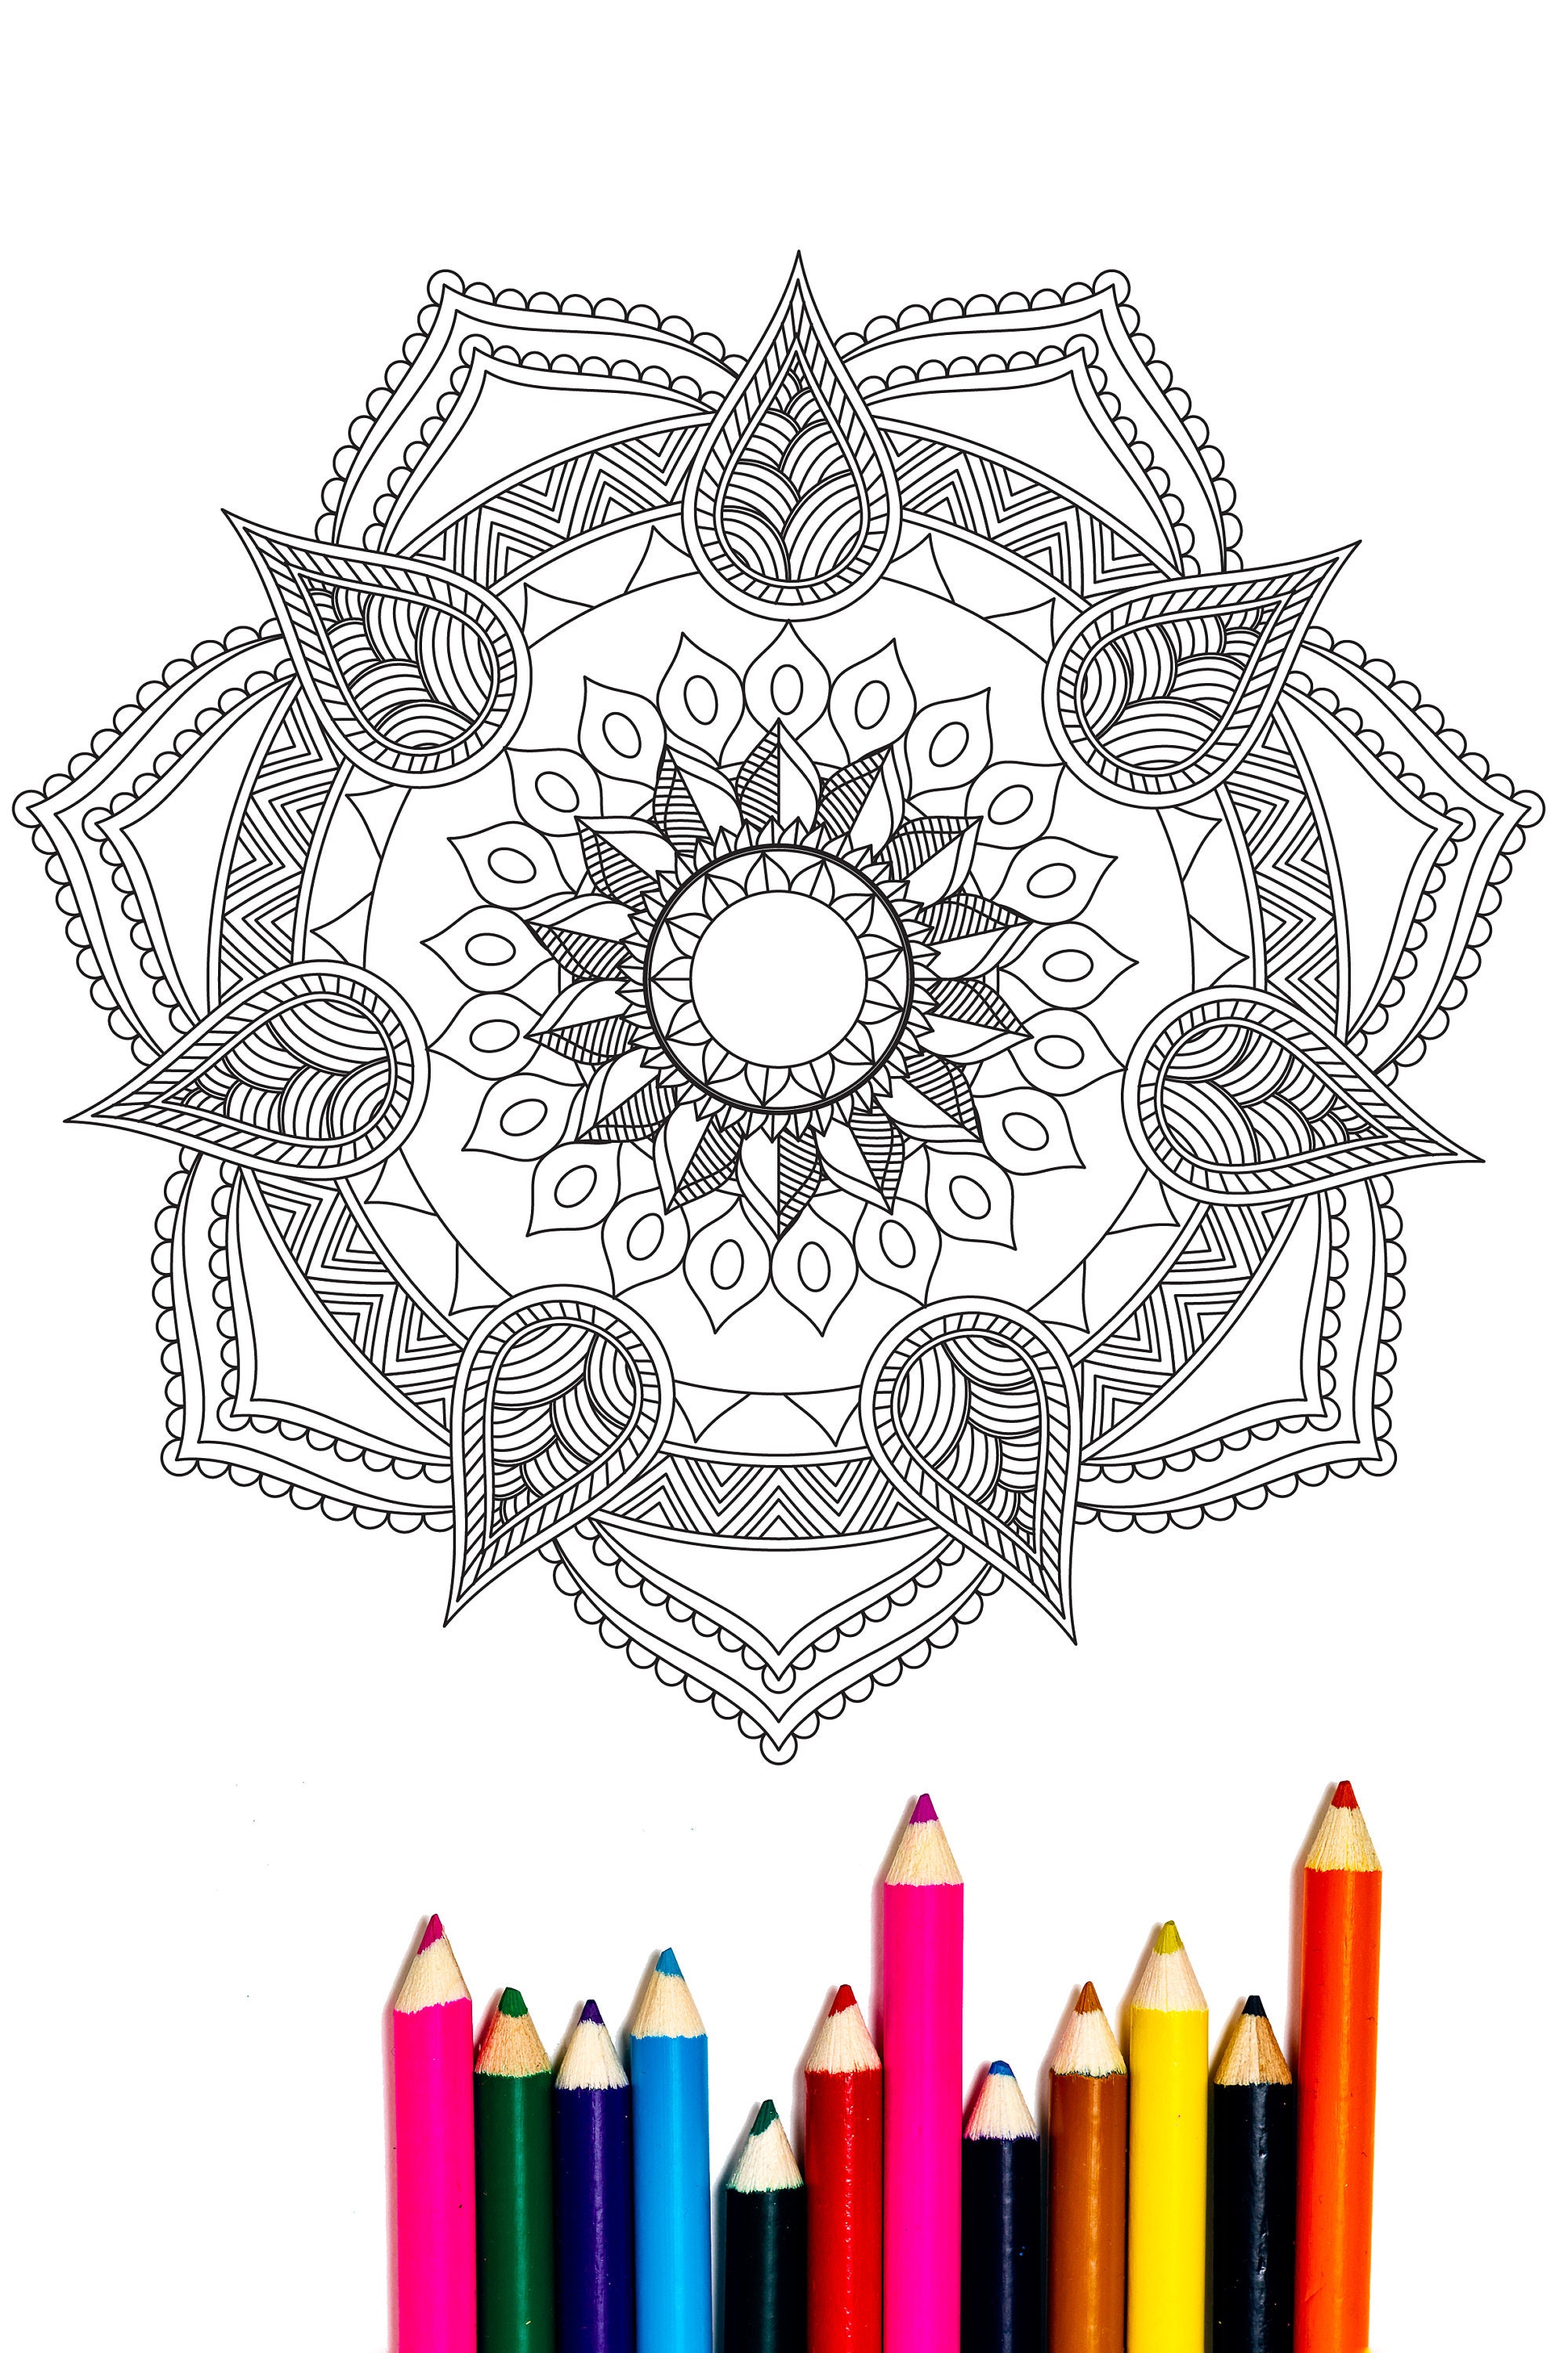 Mandala Coloring Magic - Adult Coloring Book - 8.5 x 11 inches, Spiral  Bound, Stress Relieving, Gift for Sister, Mother, Busy Grown Up